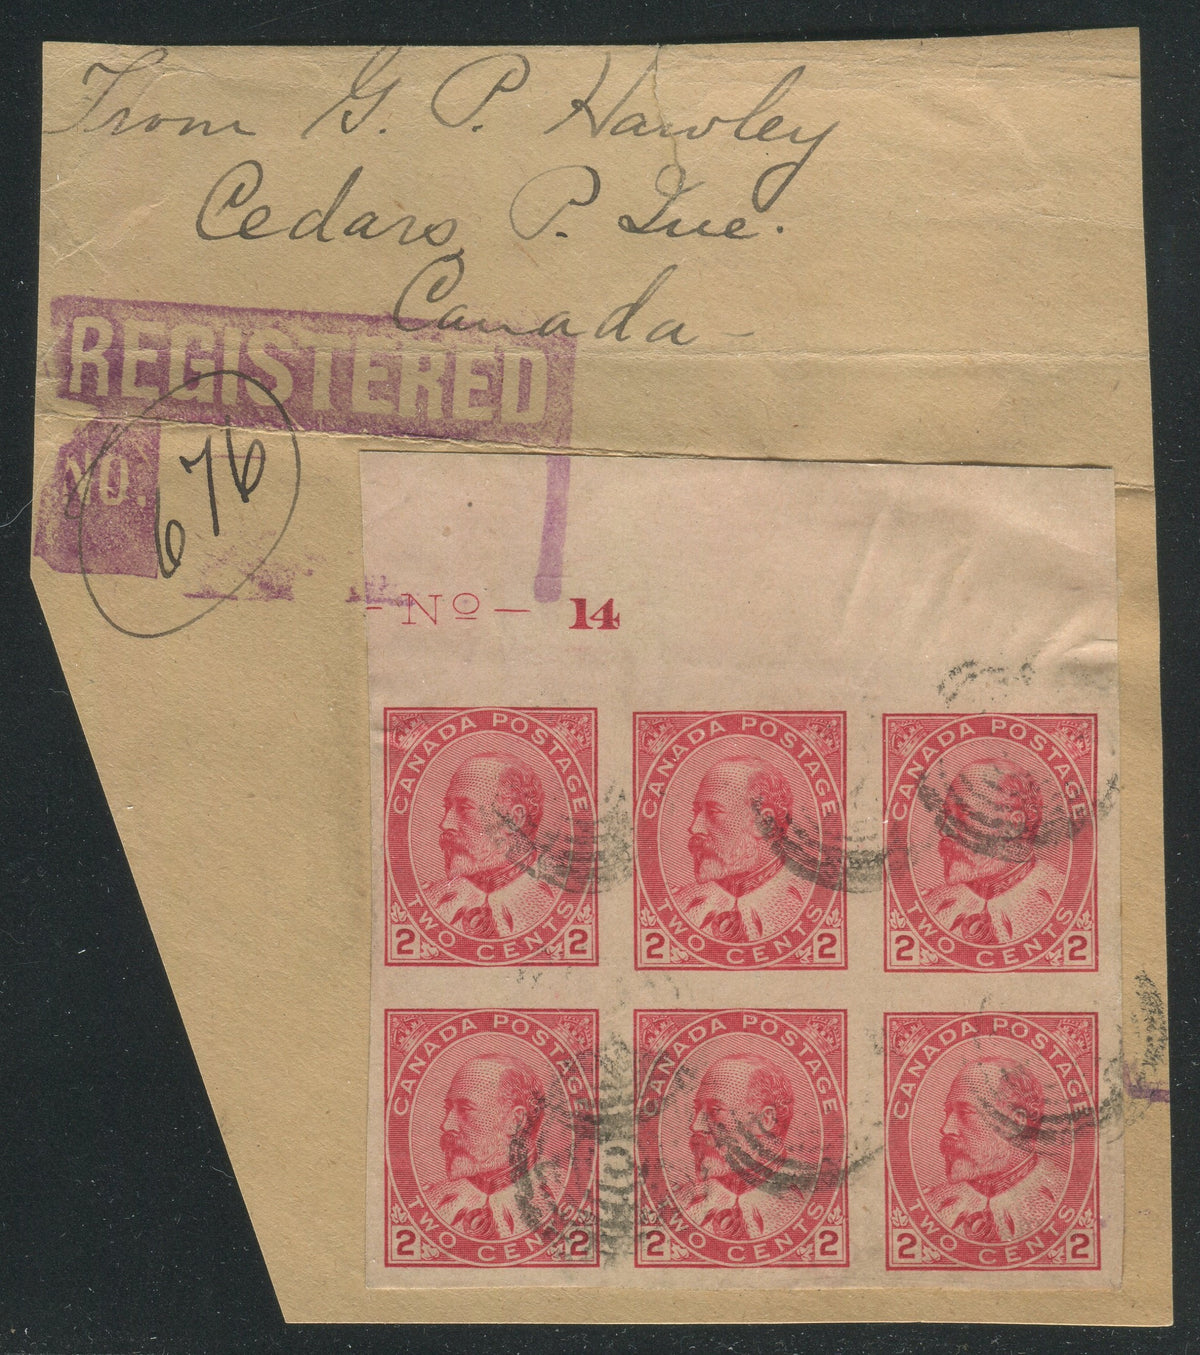 0090CA2209 - Canada #90A Plate Block of 6 On Piece